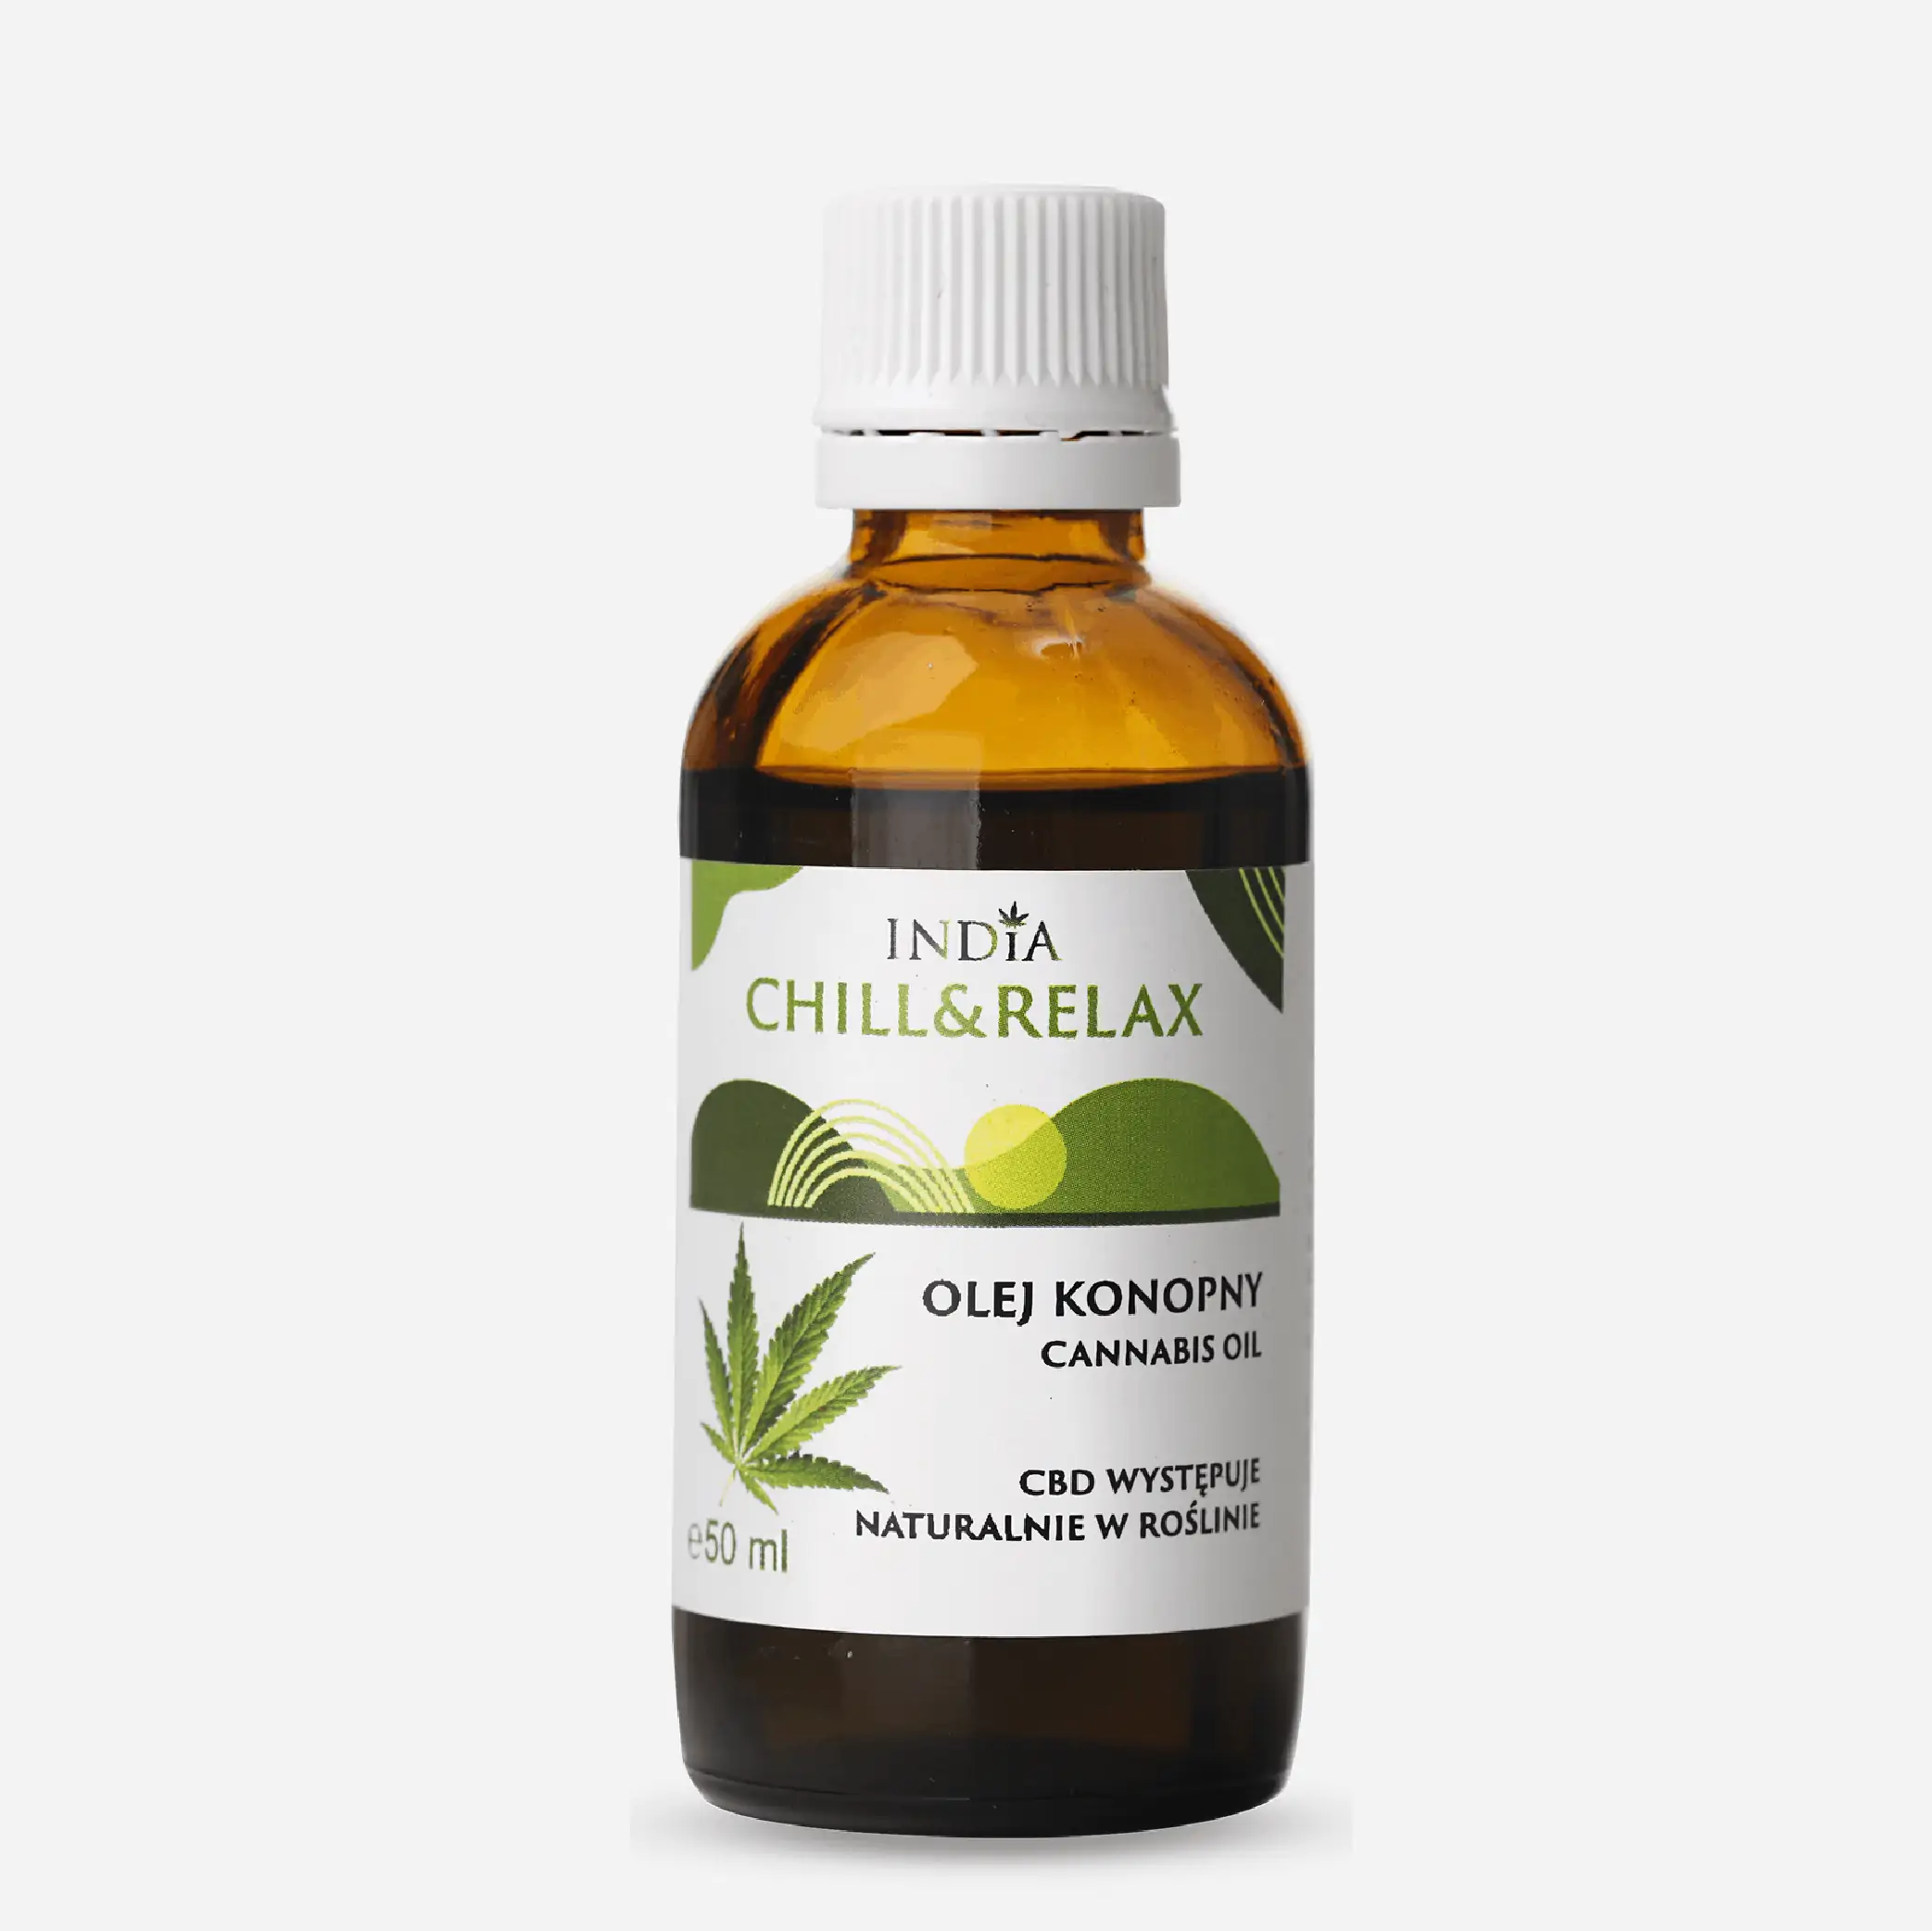 India Cosmetics Hemp Oil Chill & Relax 50Ml - Low Price, Check Reviews and  Suggested Use